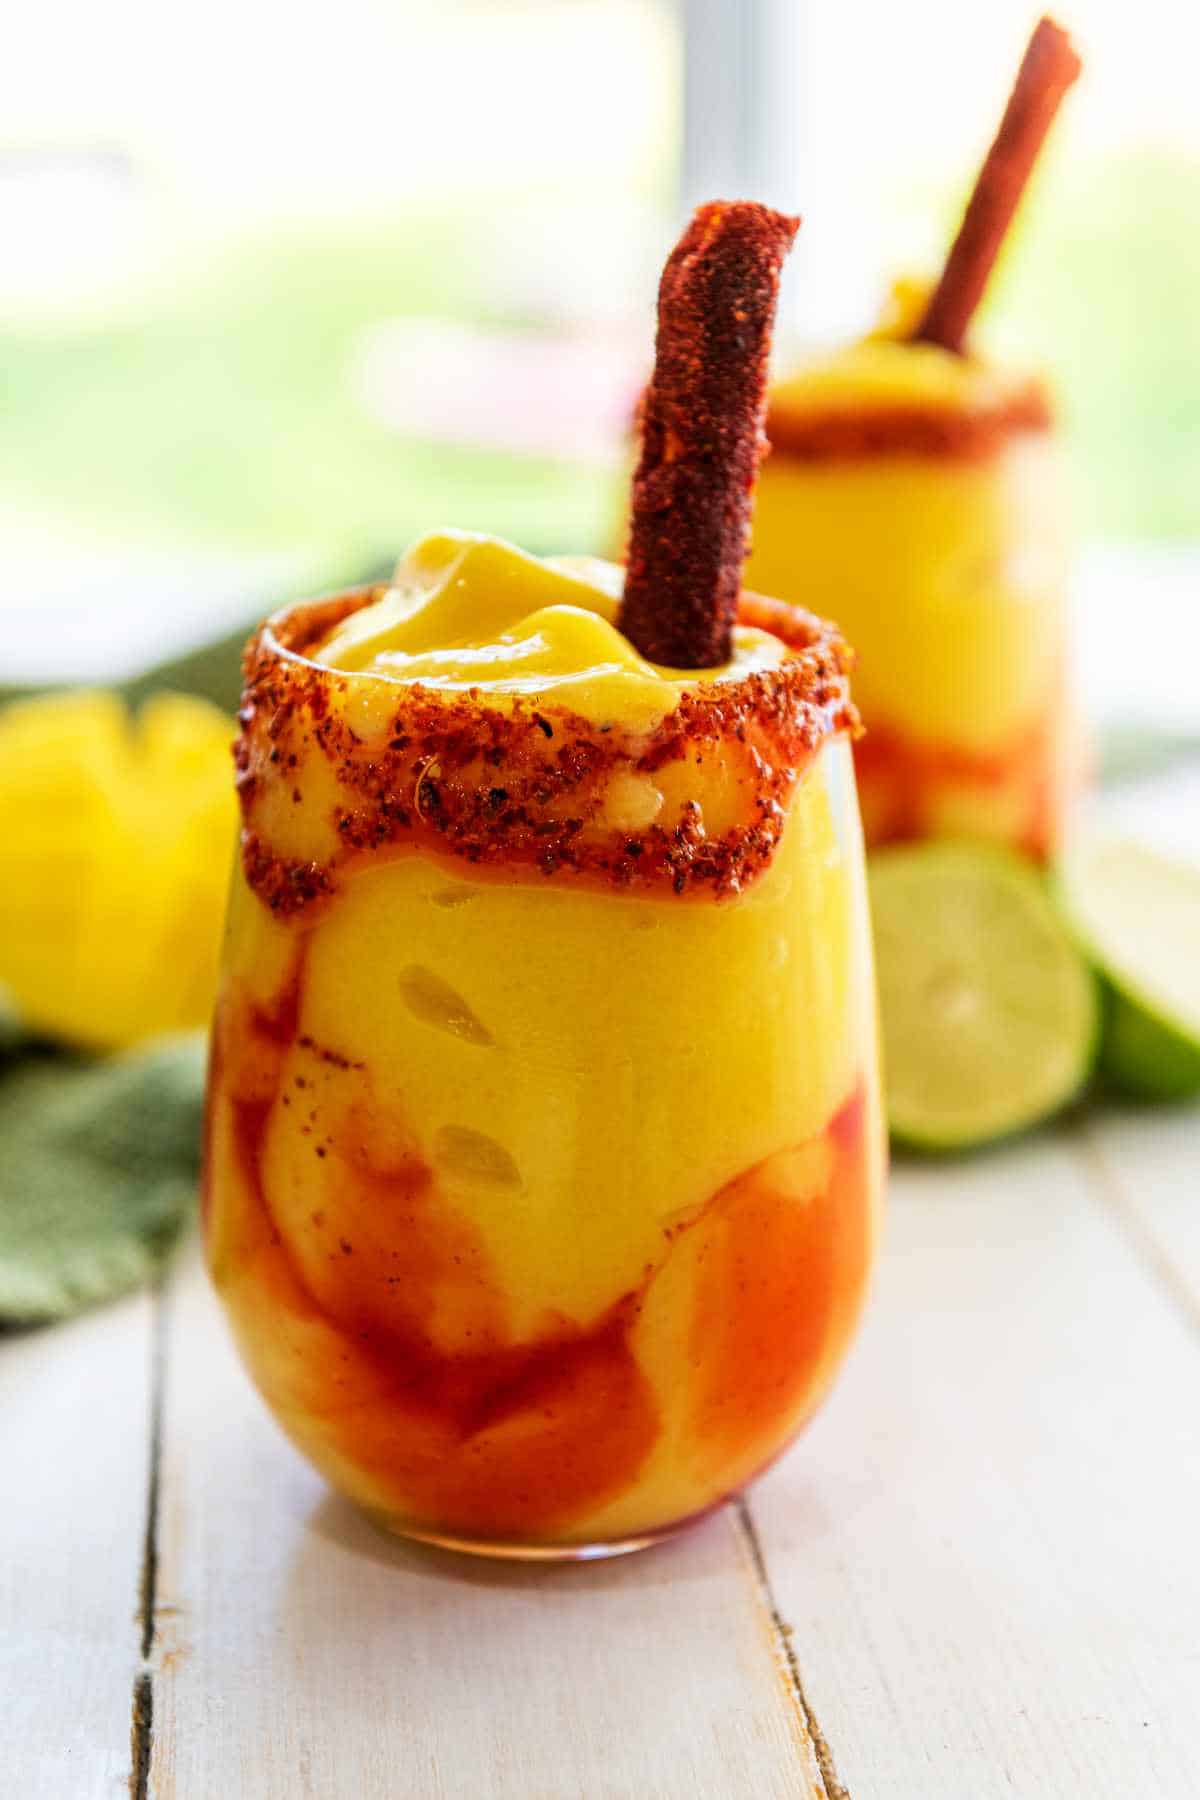 Two Chamoy and Tajin rimmed glasses filled with some mango Mangonada and a tamarind candy stick.